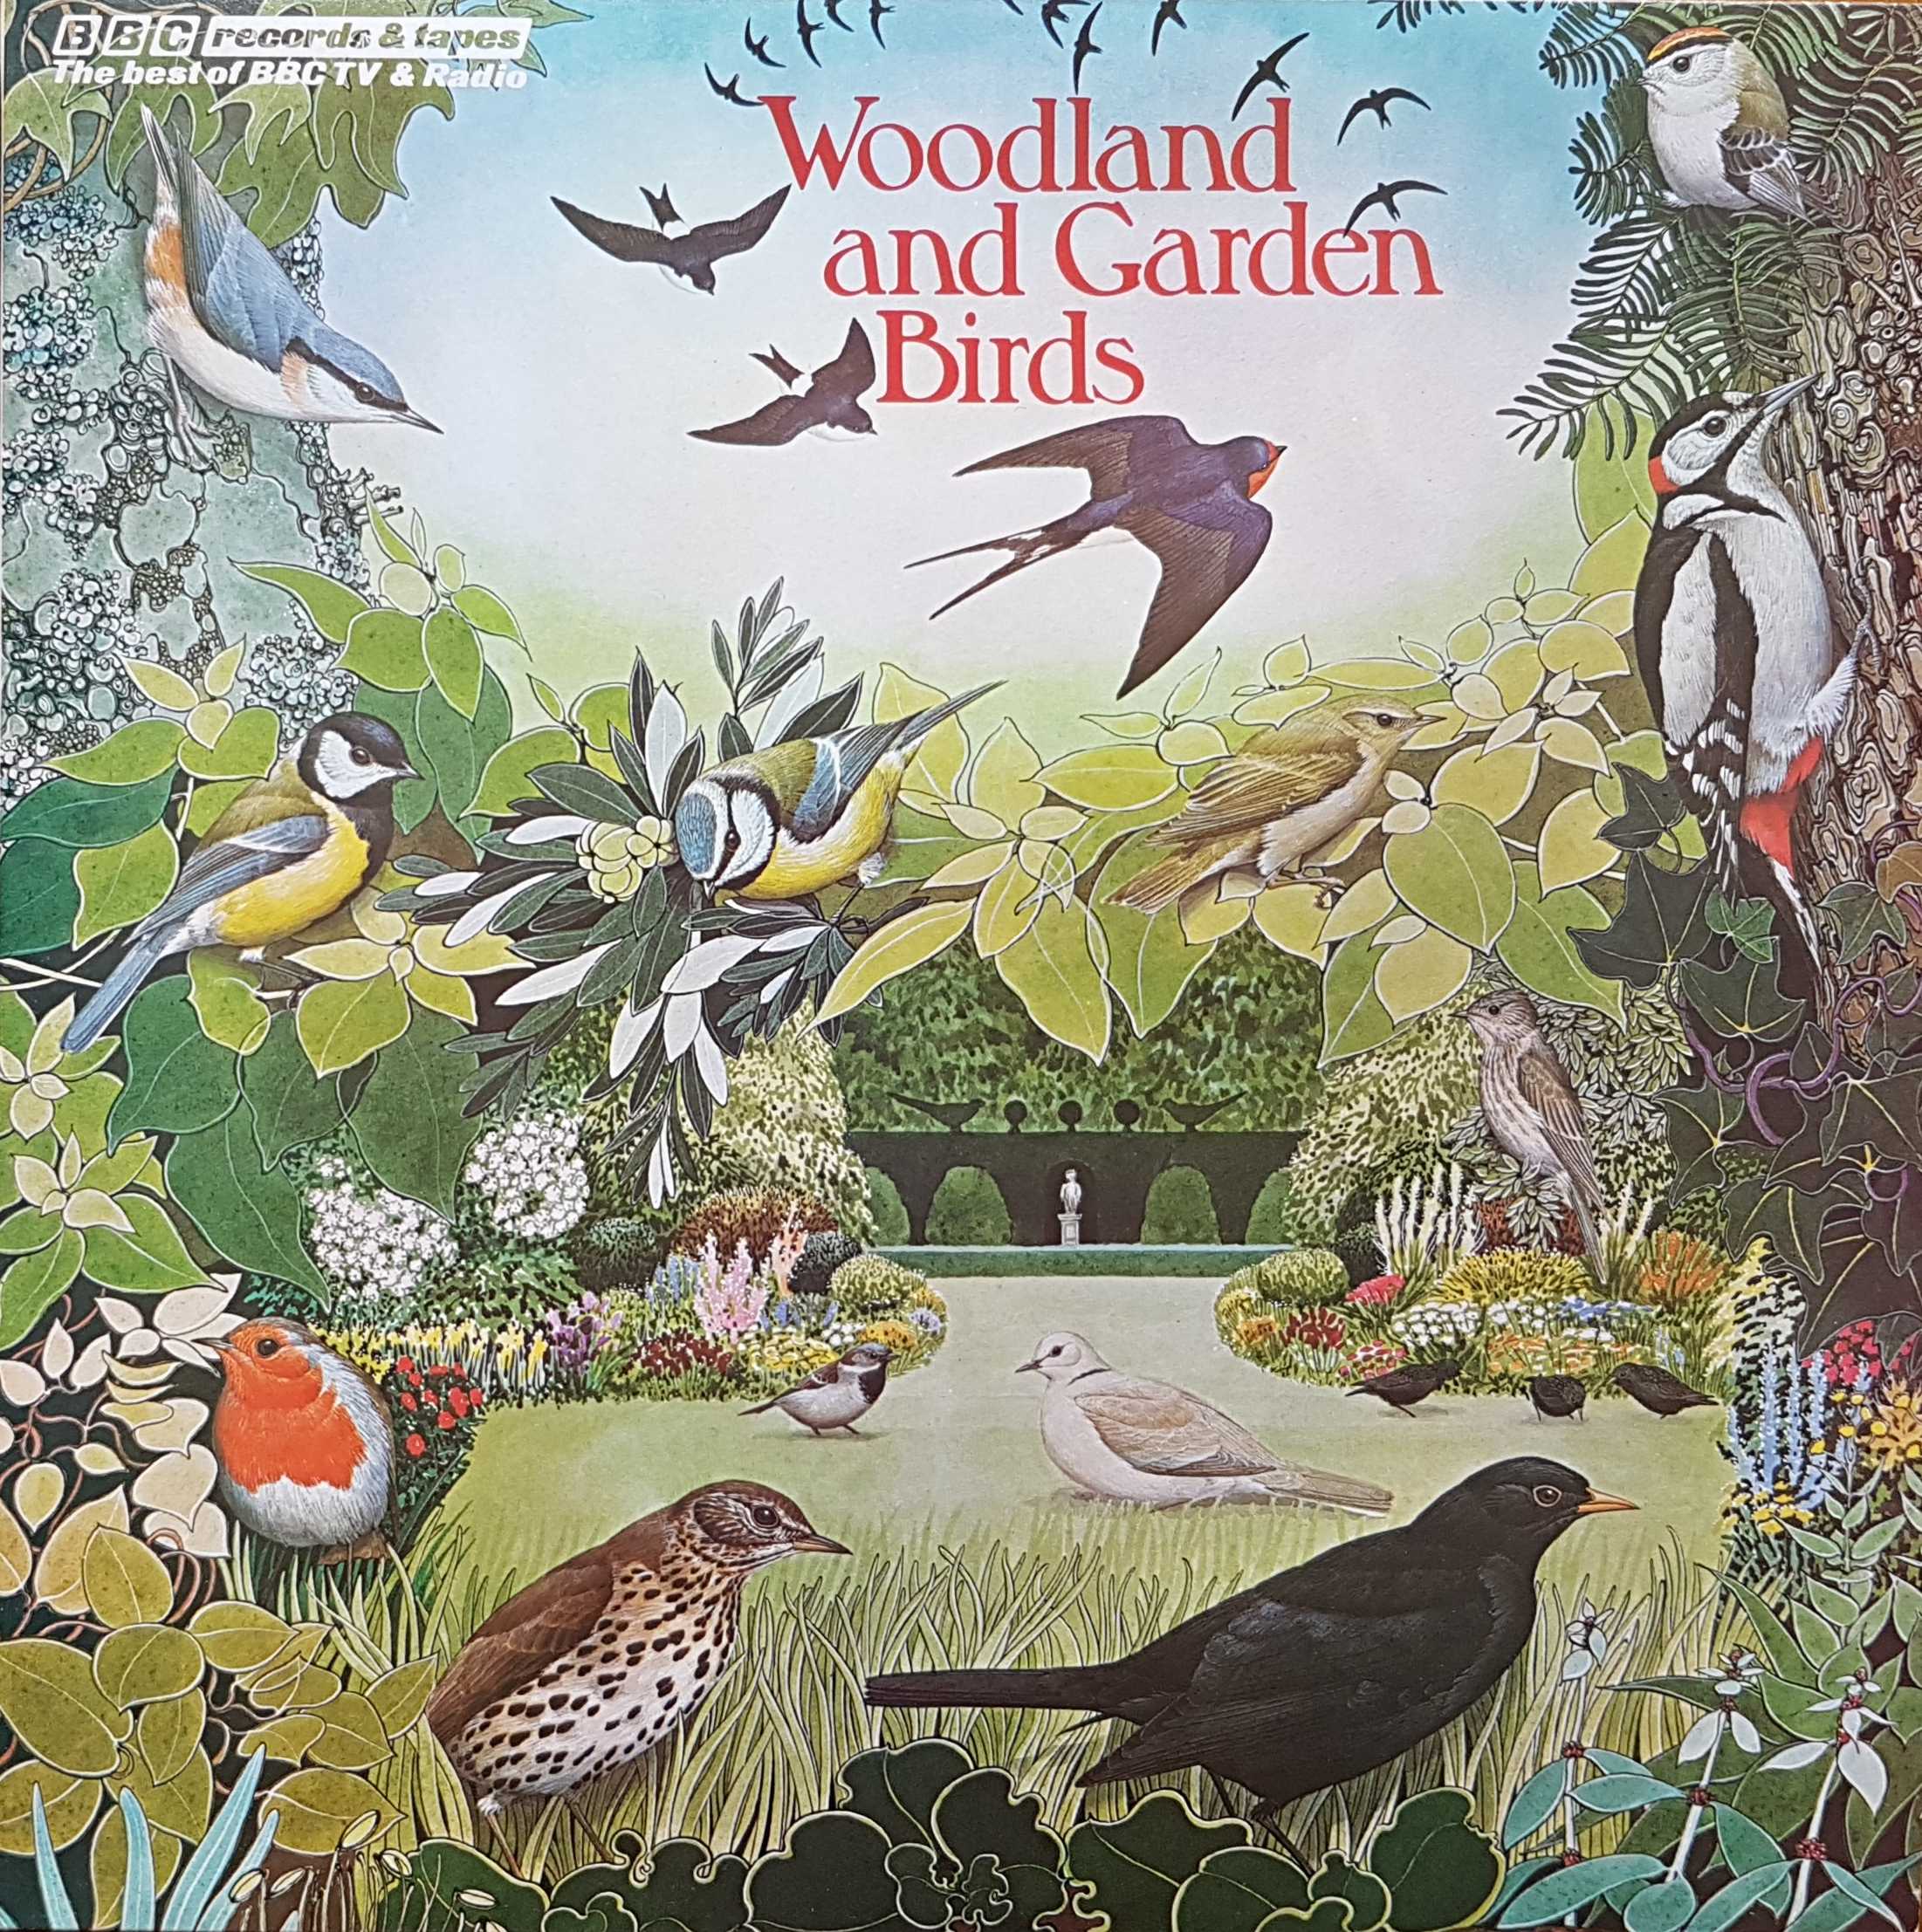 Picture of REF 235 Woodland and garden birds by artist Various from the BBC albums - Records and Tapes library